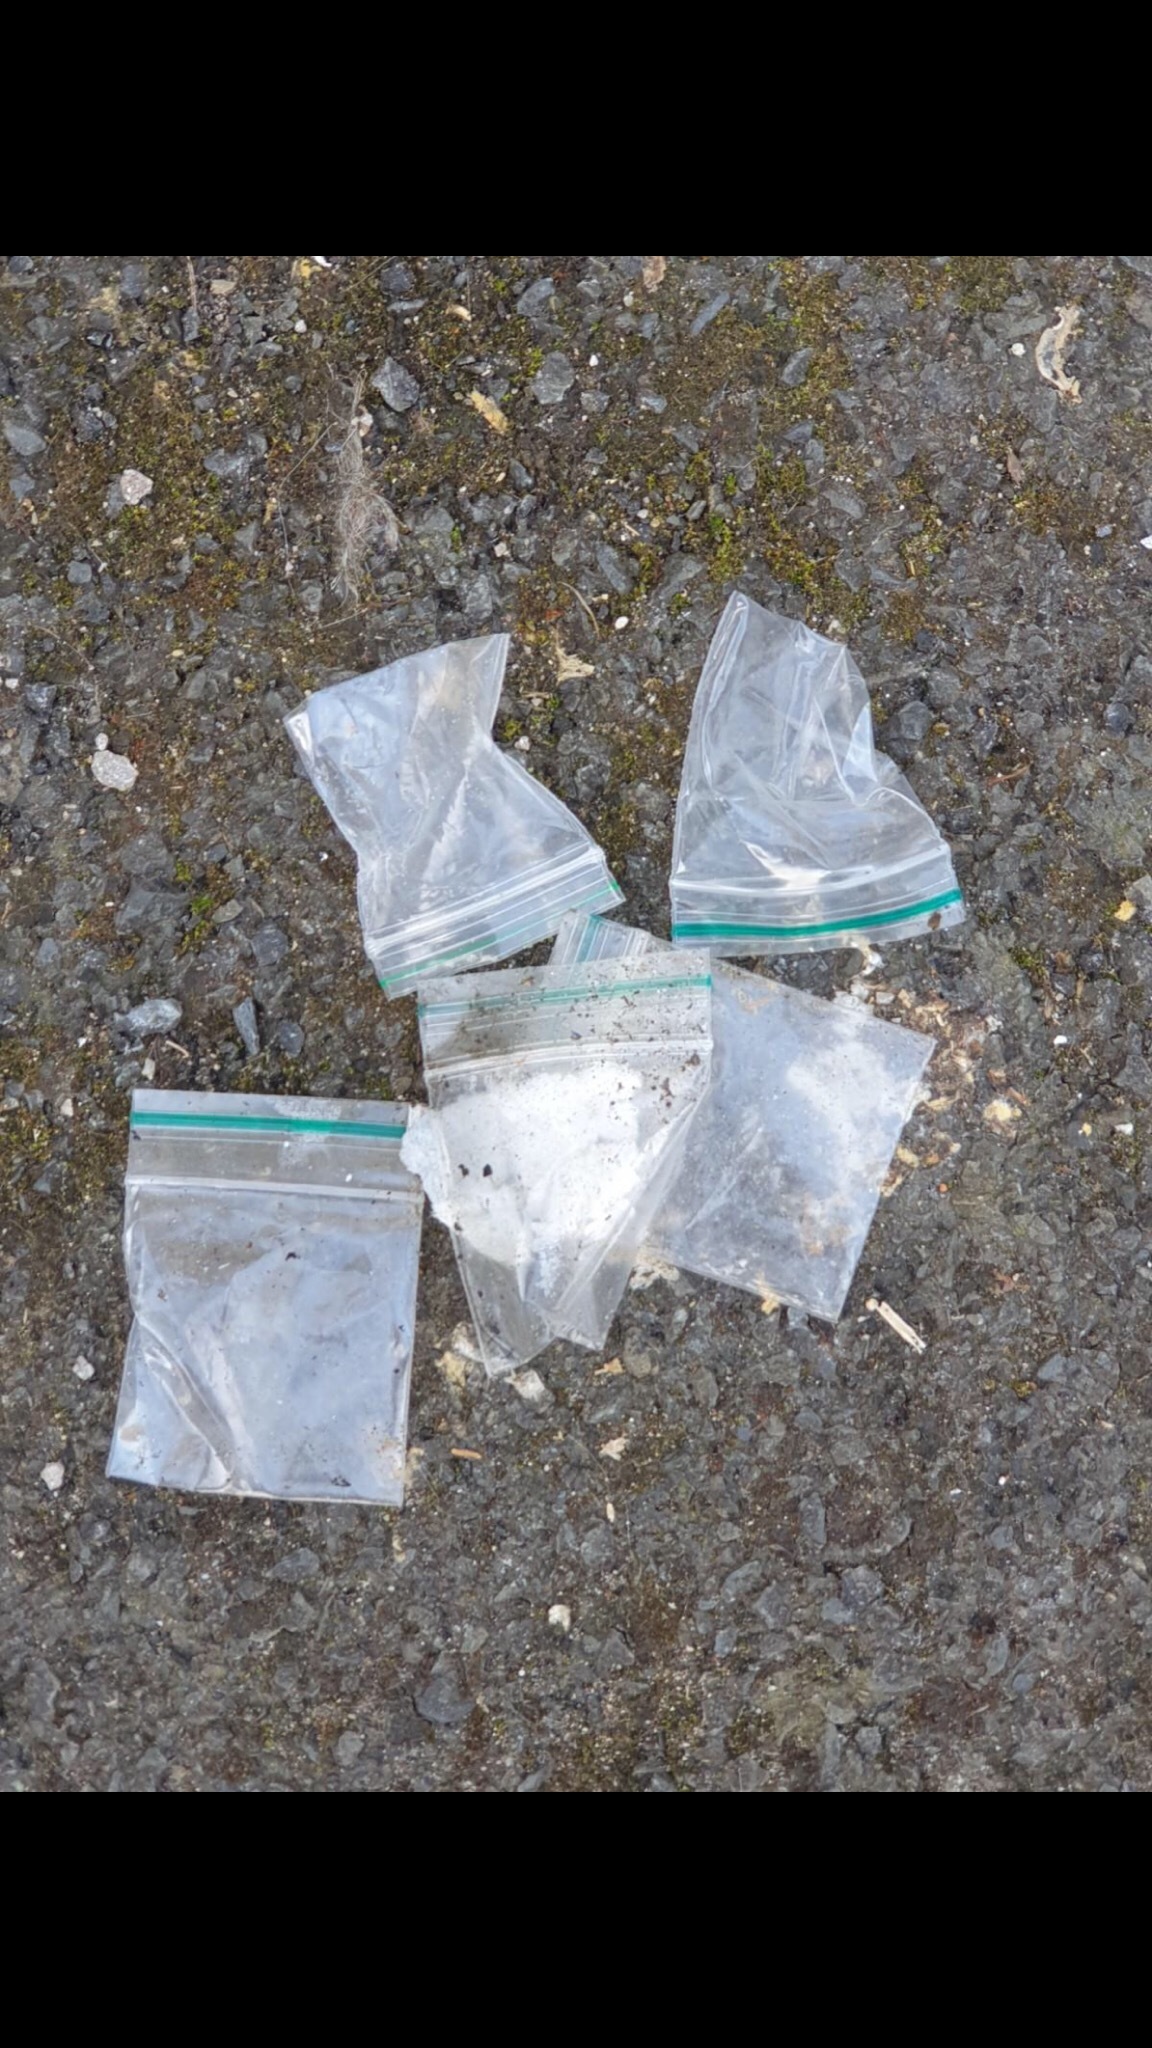 Teens have been causing havoc, taking drugs and littering close to thw Mosque on Bond Street in Nelson